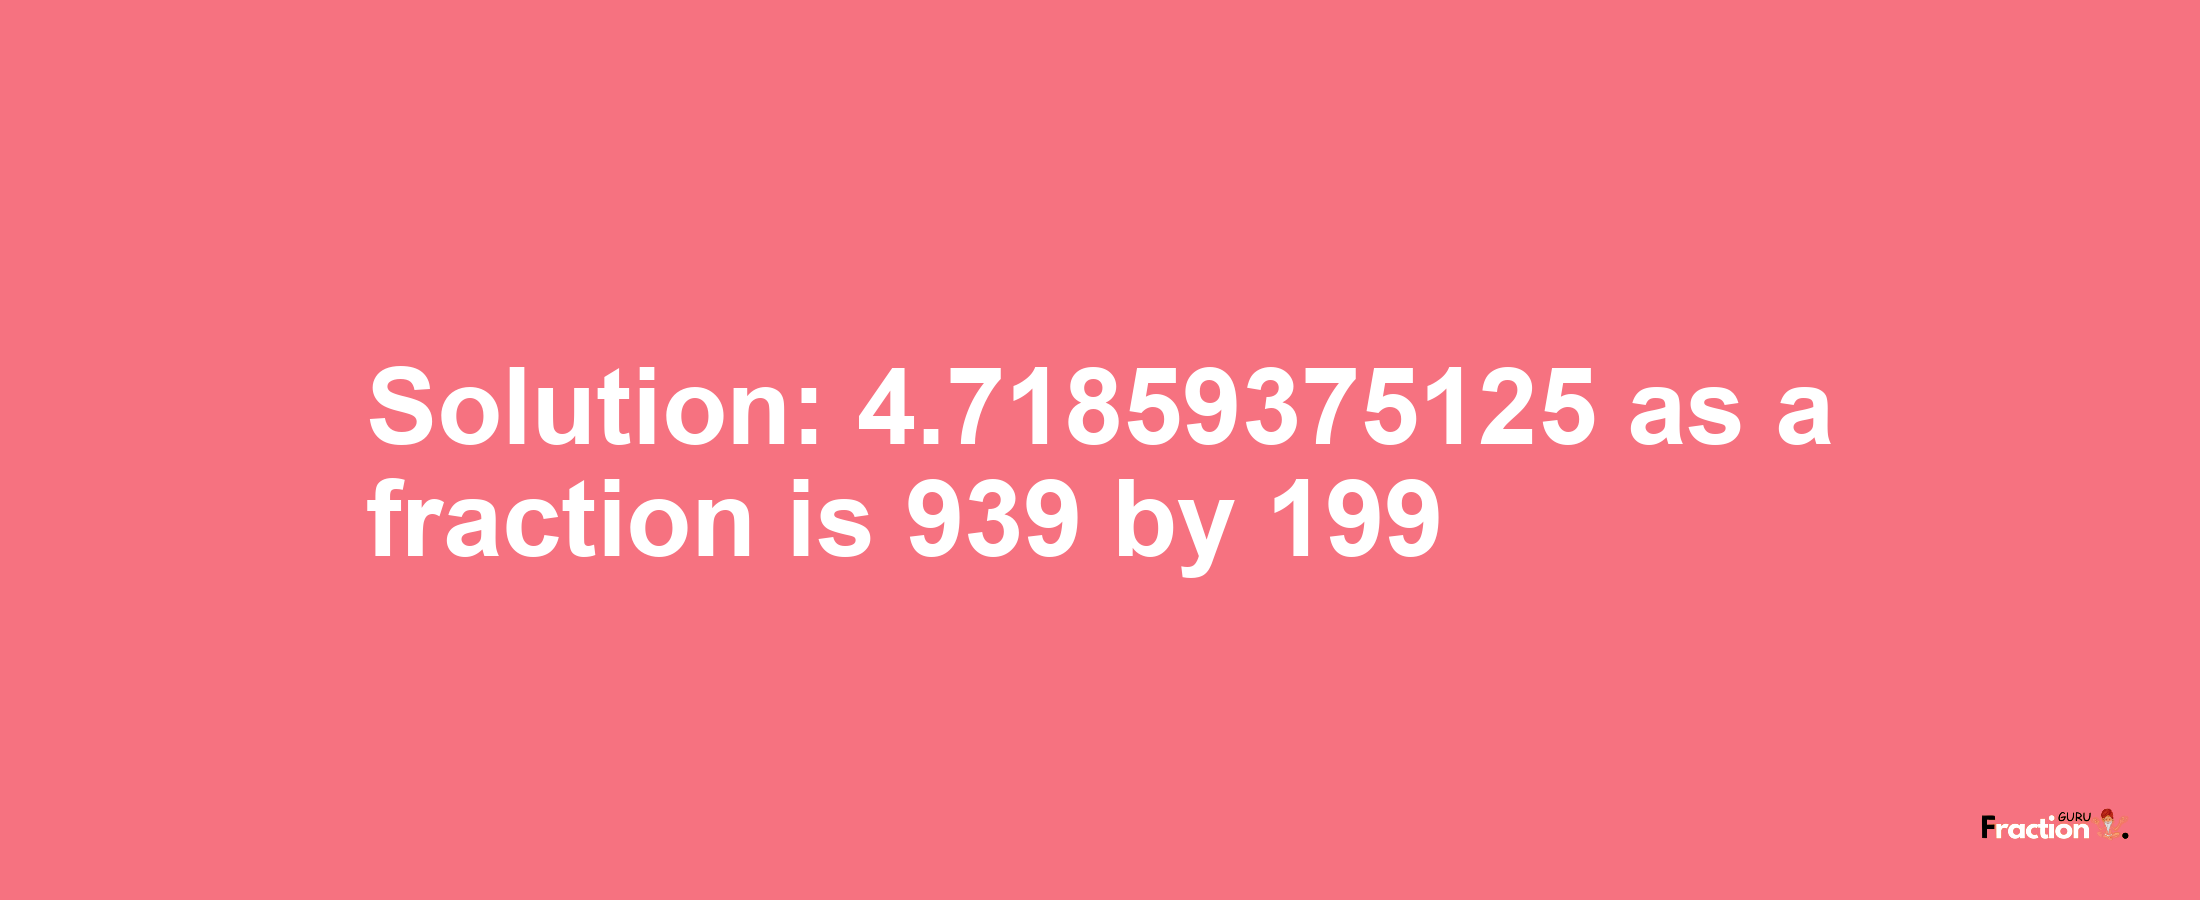 Solution:4.71859375125 as a fraction is 939/199